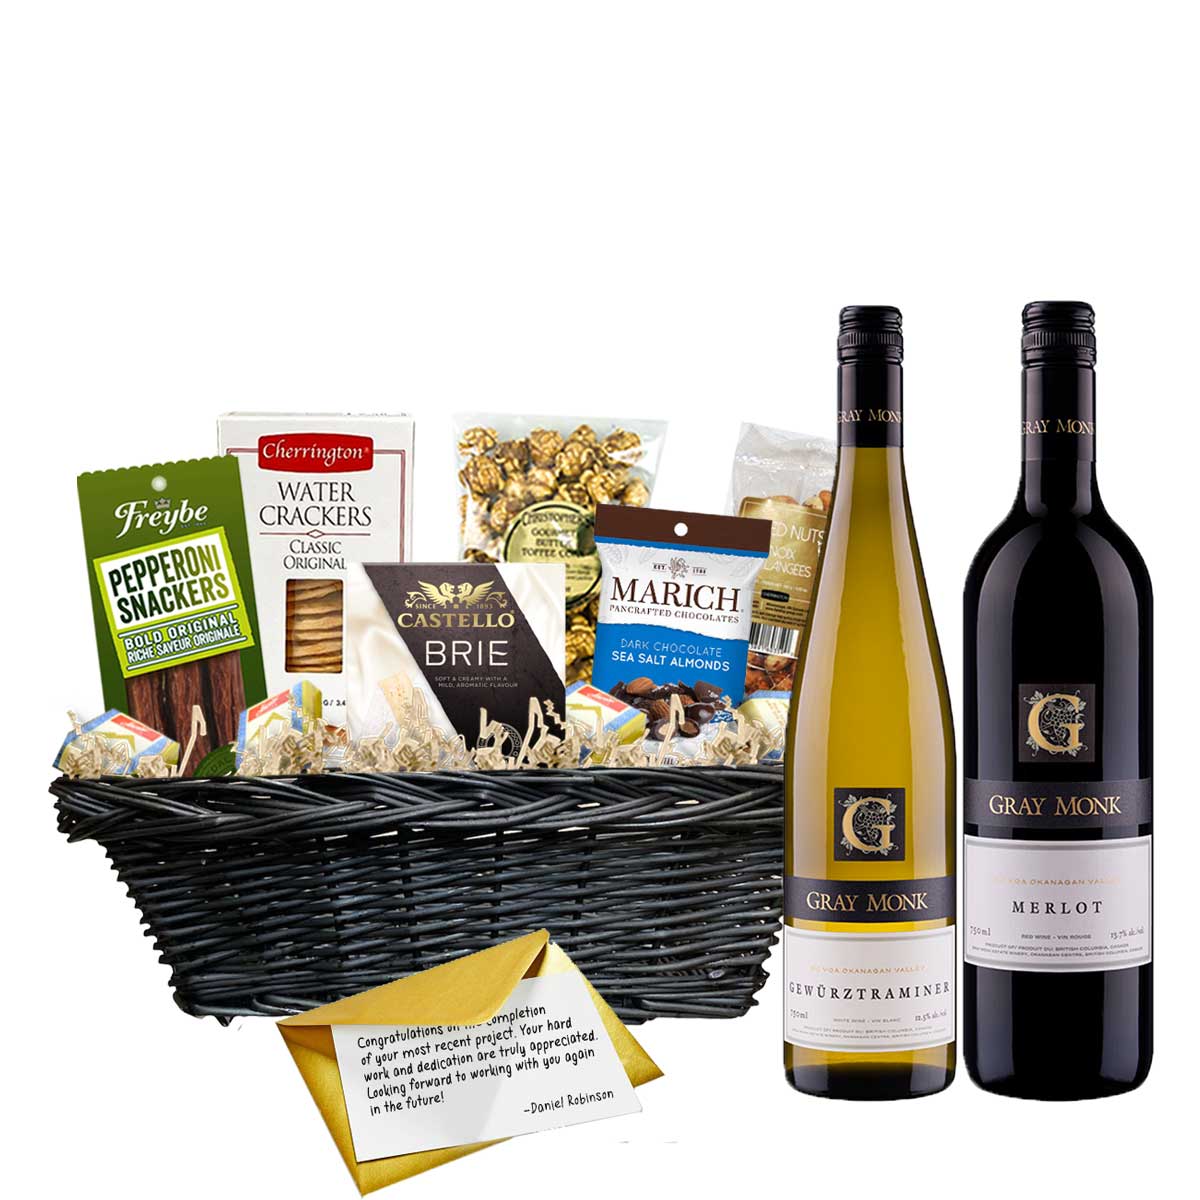 TAG Liquor Stores Canada Delivery-Gray Monk Gewurztraminer and Merlot 2 x 750ml Corporate Gift Basket-wine-tagliquorstores.com